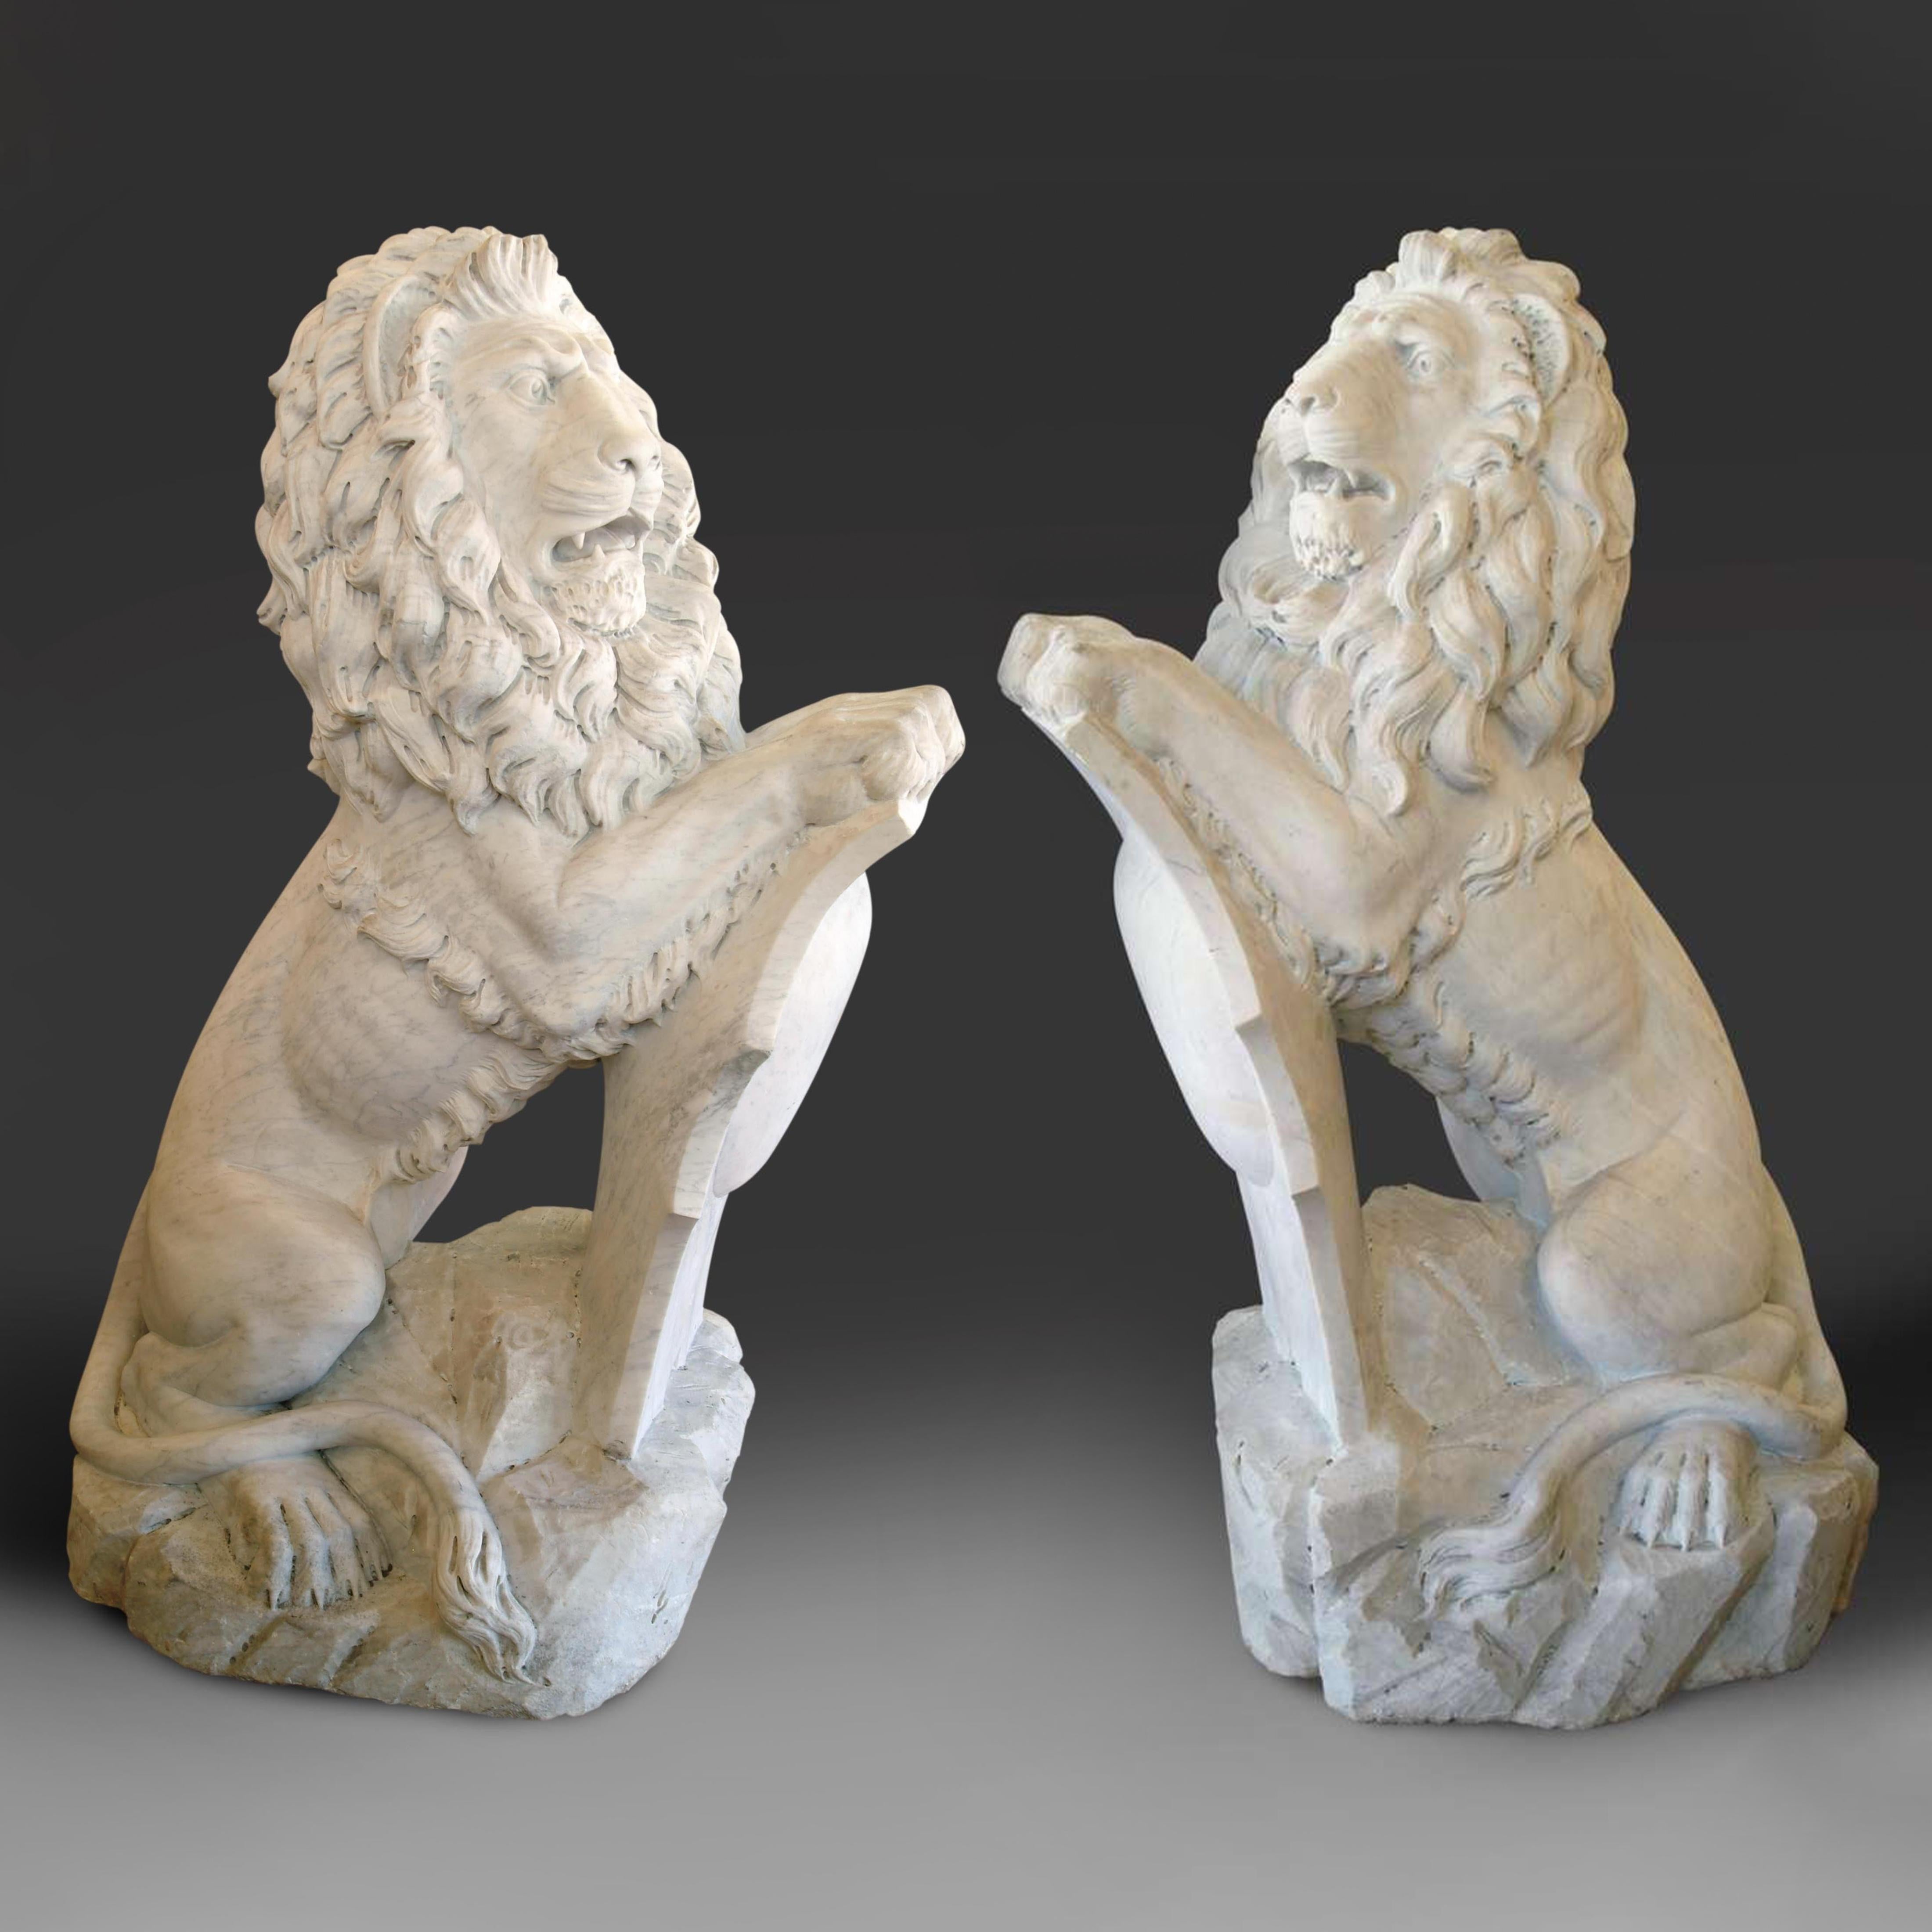 An impressive pair of life-size 19th century English Baroque style carved white marble sitting lions. each lion resting its front paws on a carved shield.
After Josef Gott.

This pair is the largest we ever had in this model.

circa